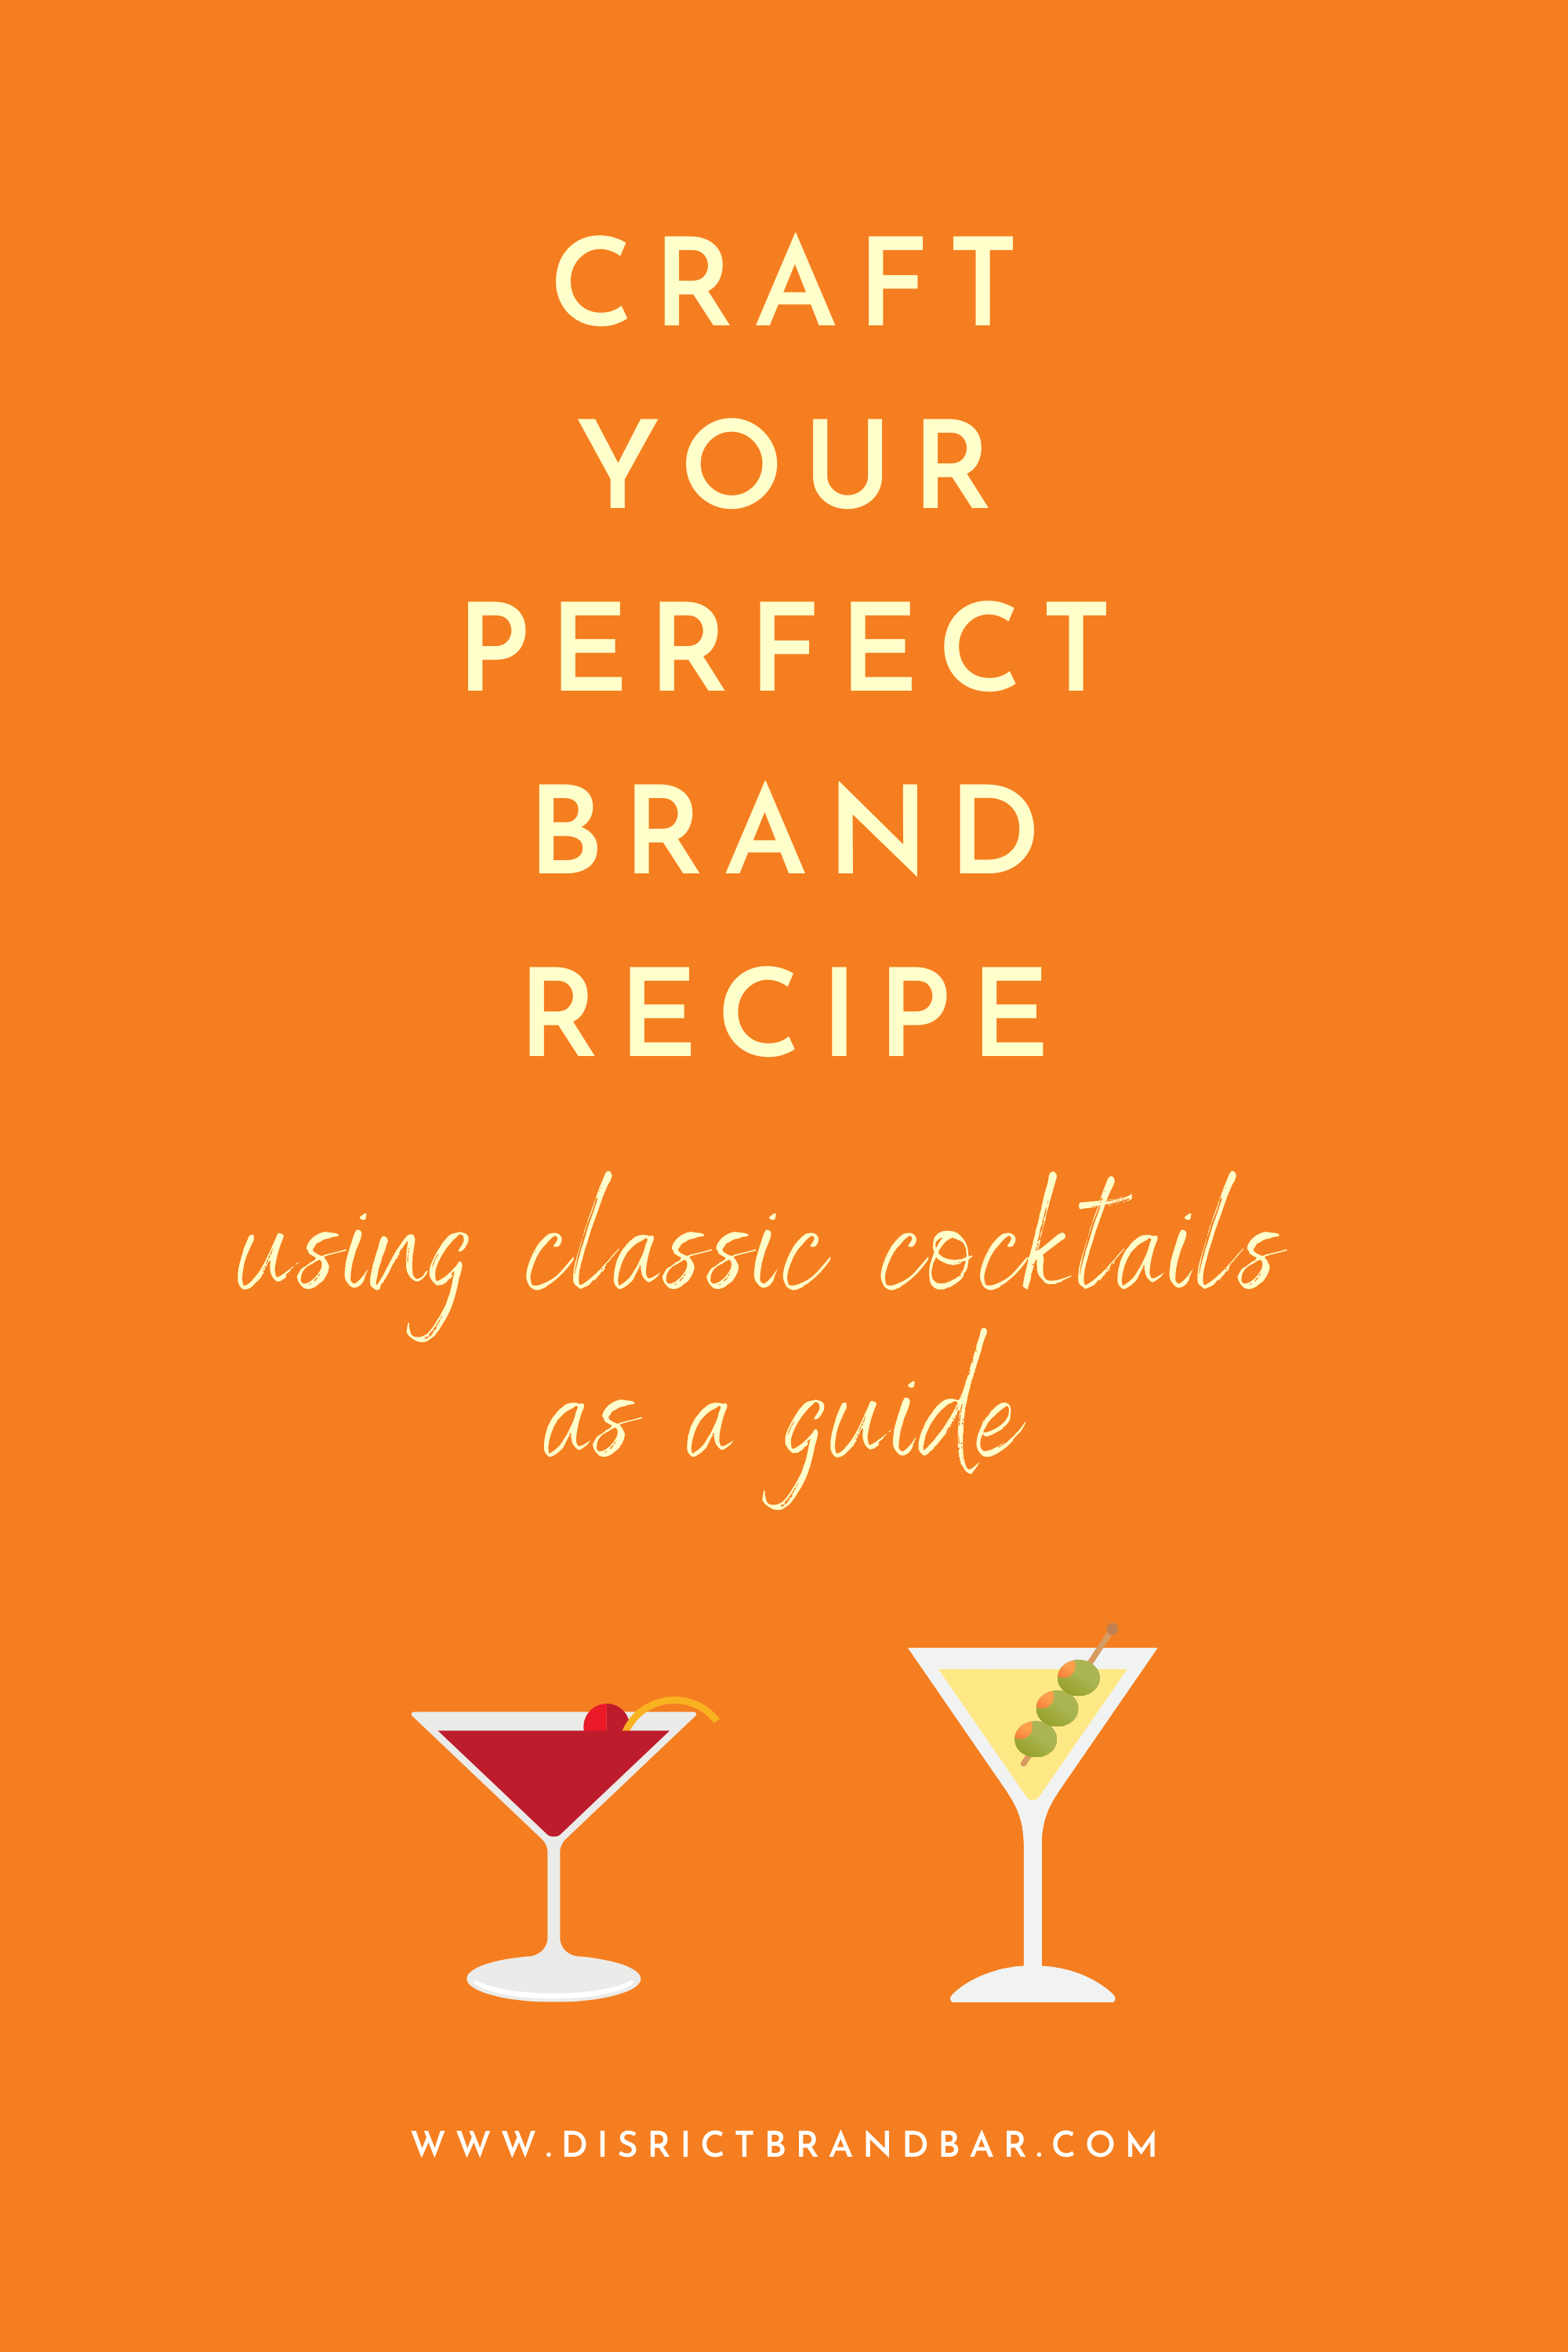 Craft Your Perfect Brand Recipe